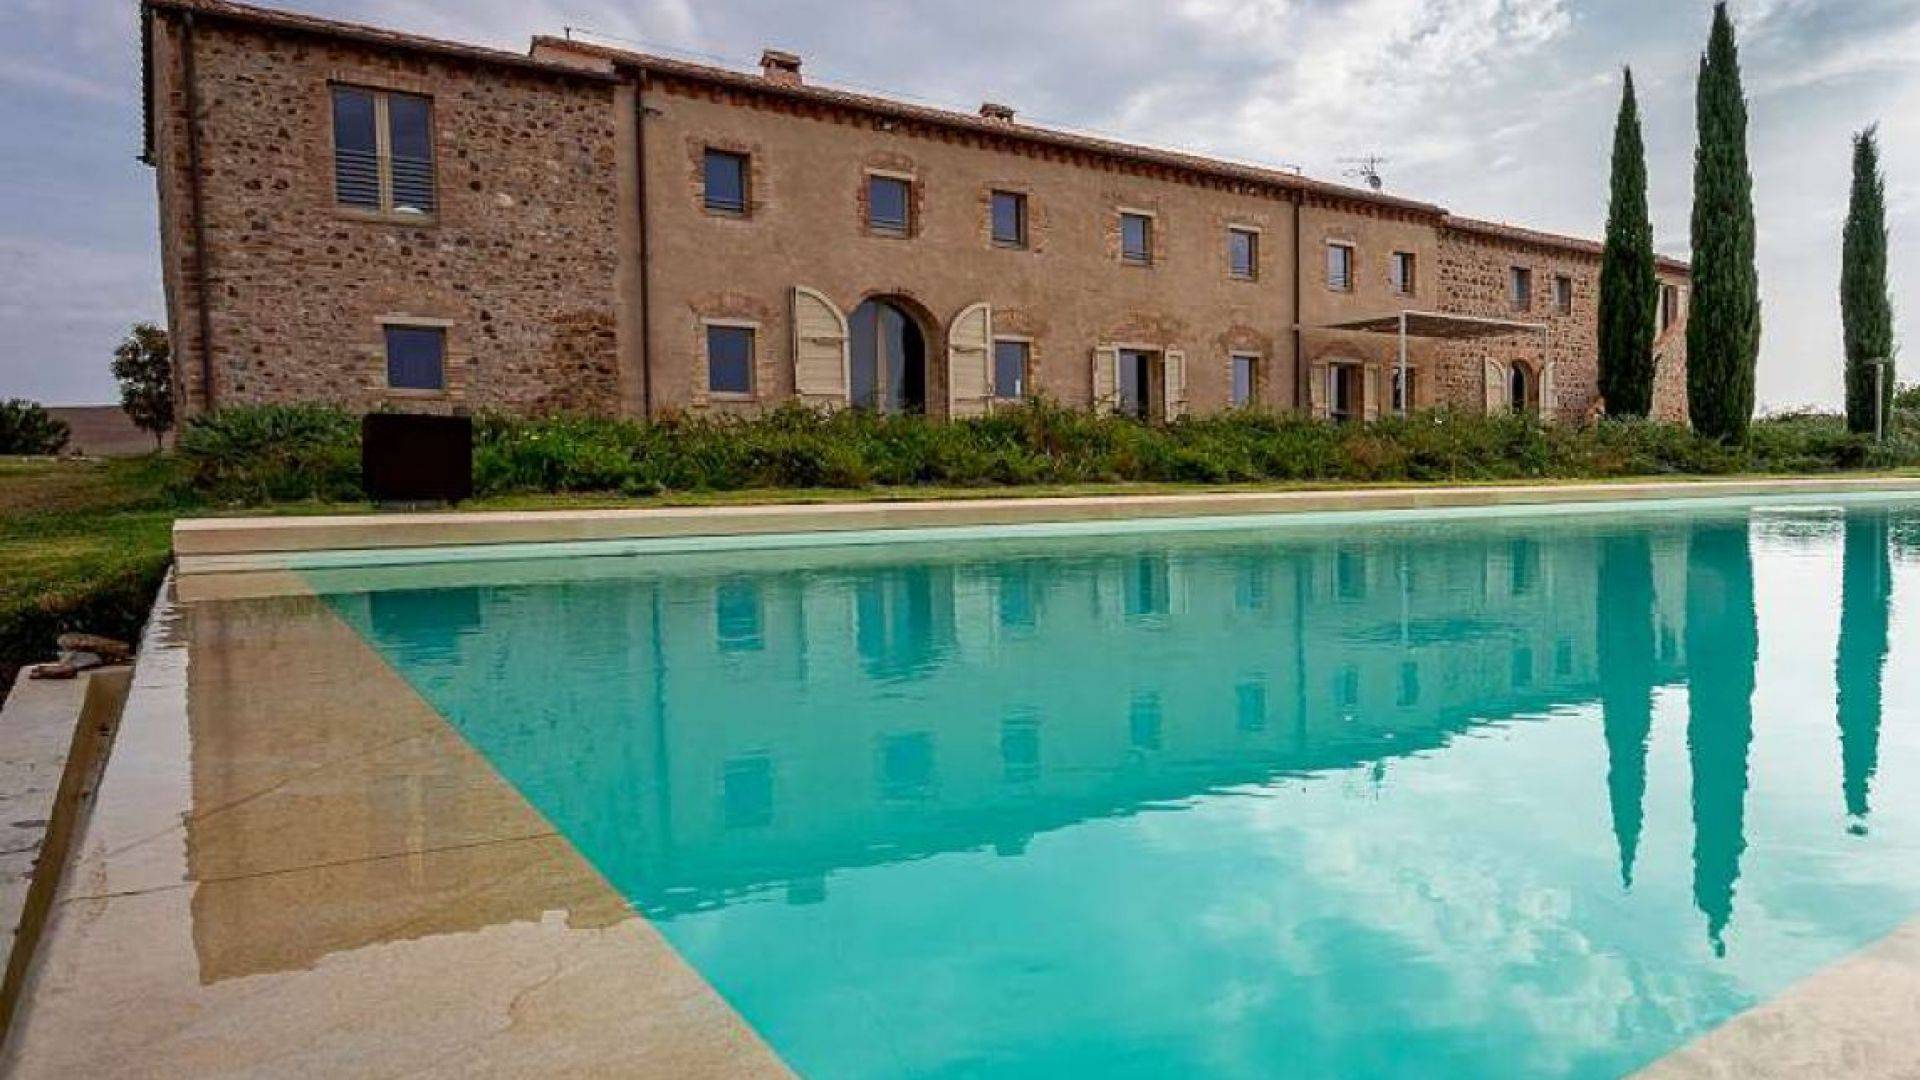 207-acre farmstead with superbly restored country villa with heated pool, solar panels, domotics and elevator for sale in Volterra, Pisa.